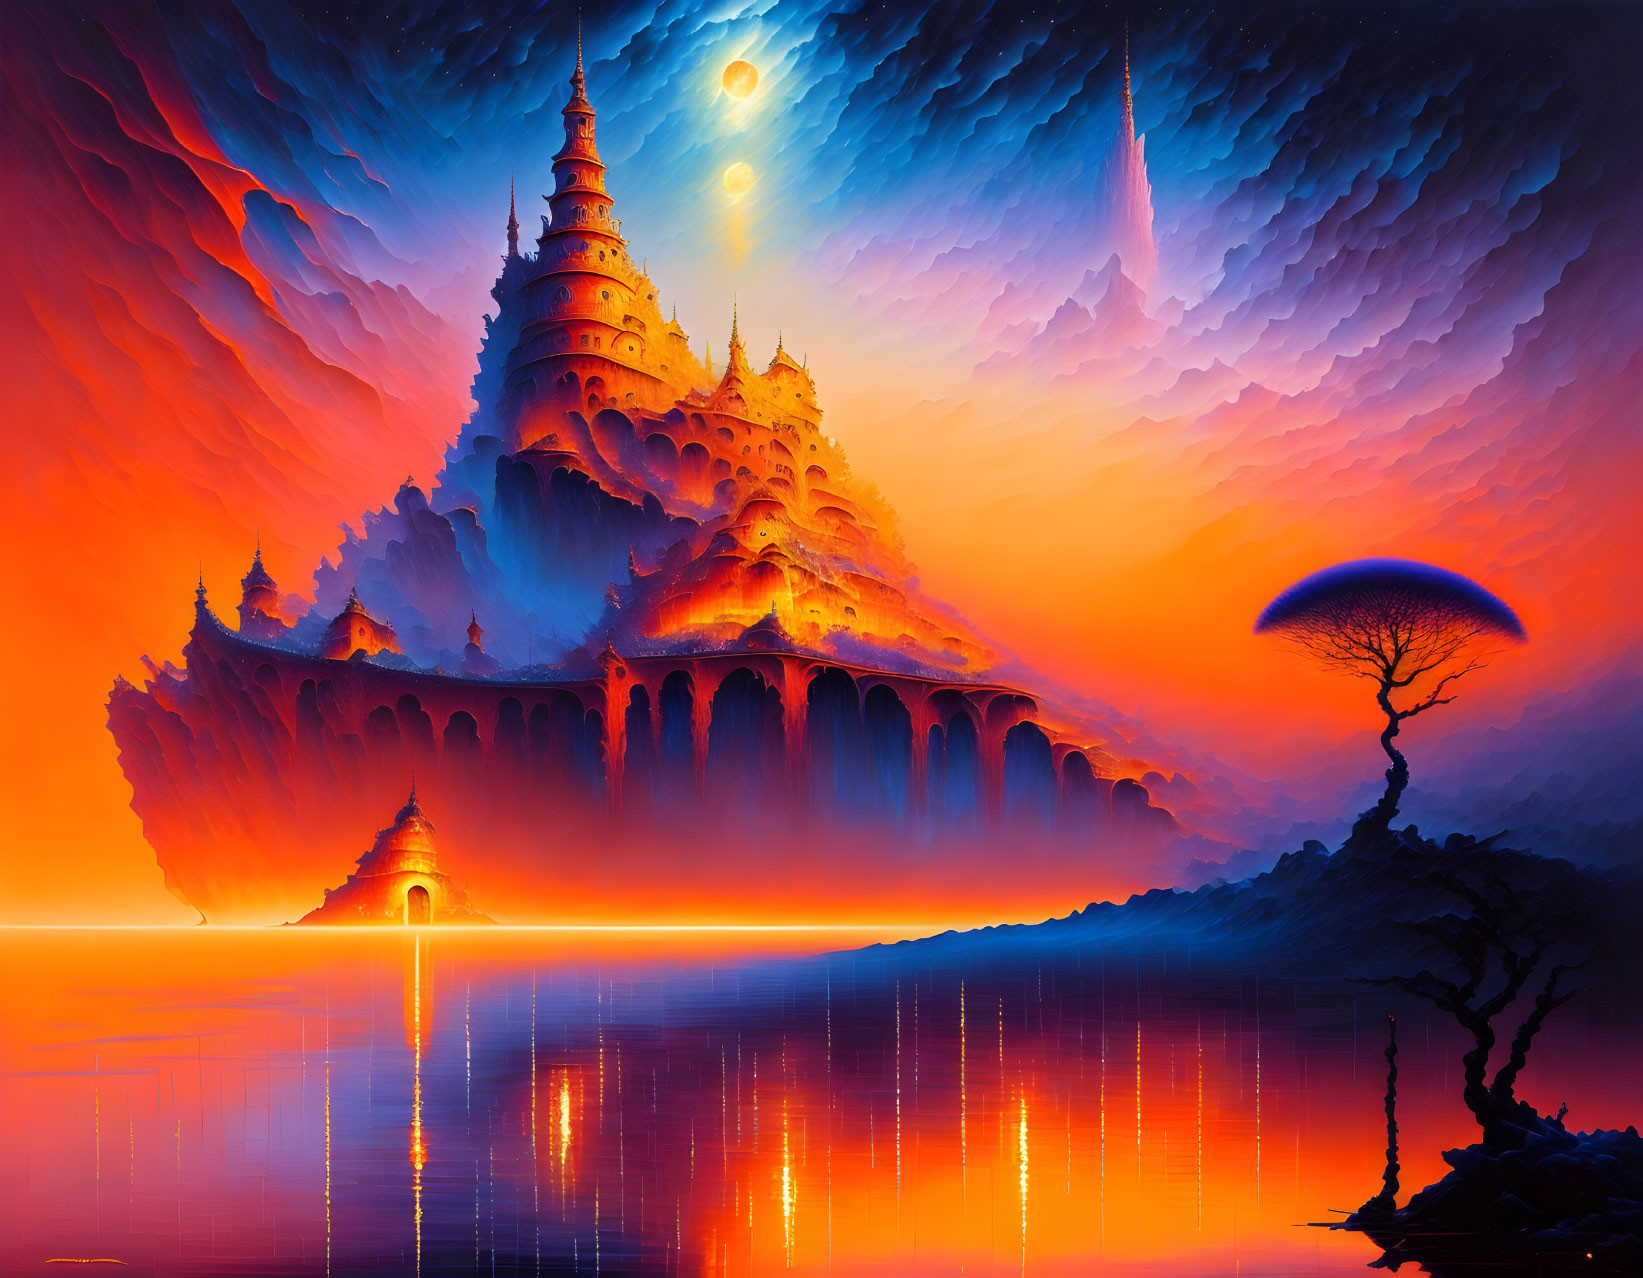 Majestic castle in vibrant fantasy landscape with two moons